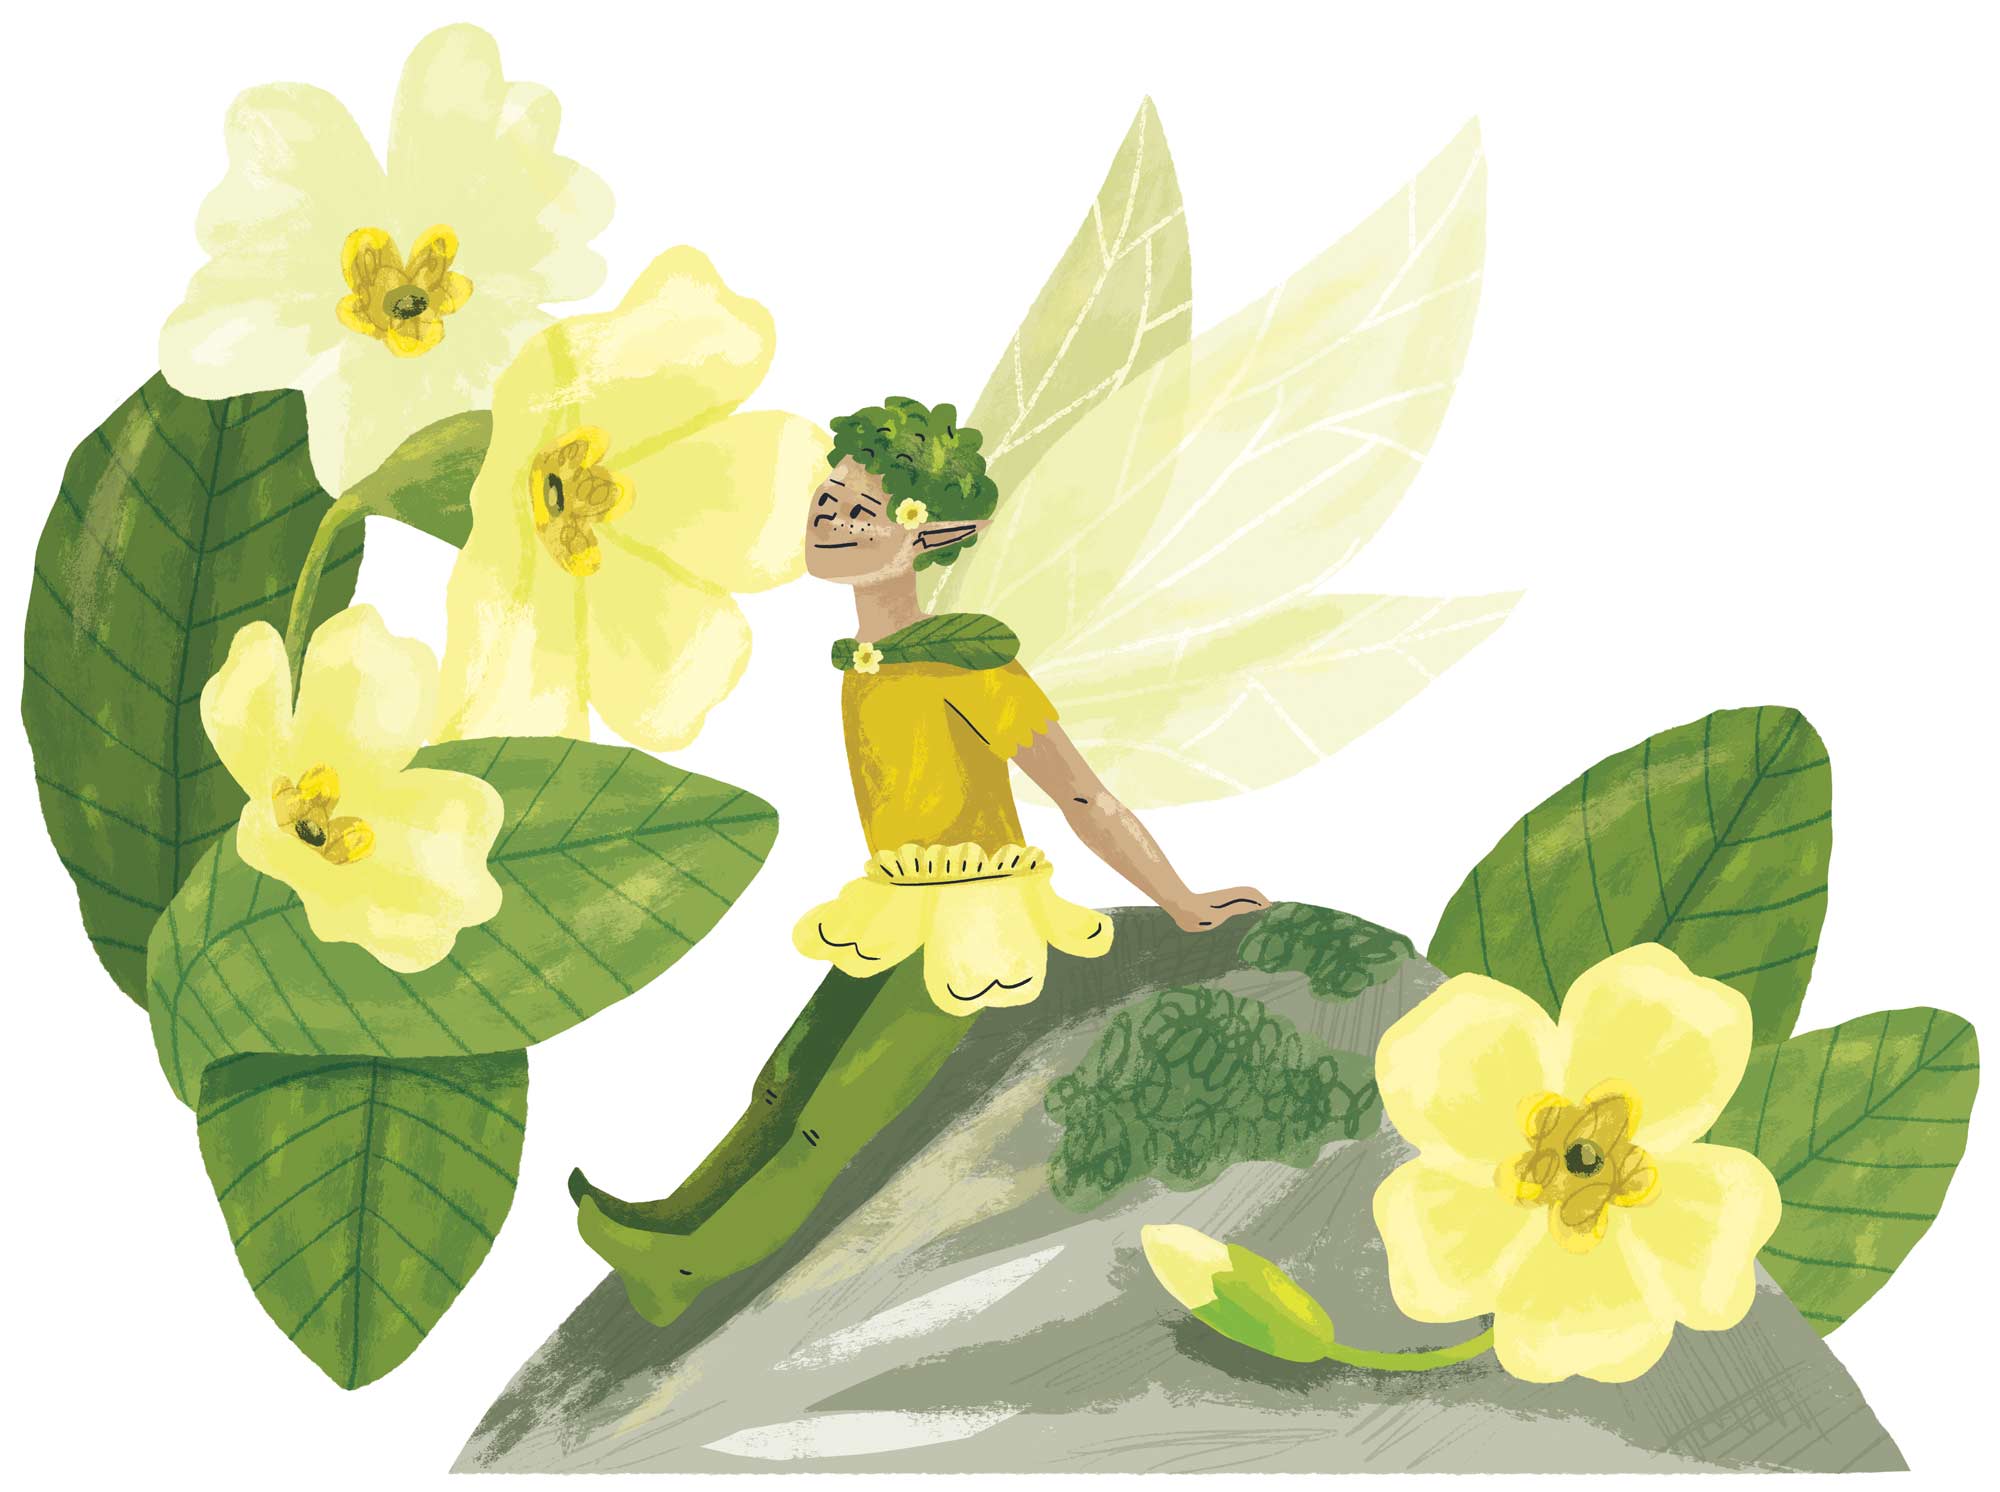 Primrose Fairy from Foraging: The Complete Guide for Kids and Families illustrated by Elly Jahnz